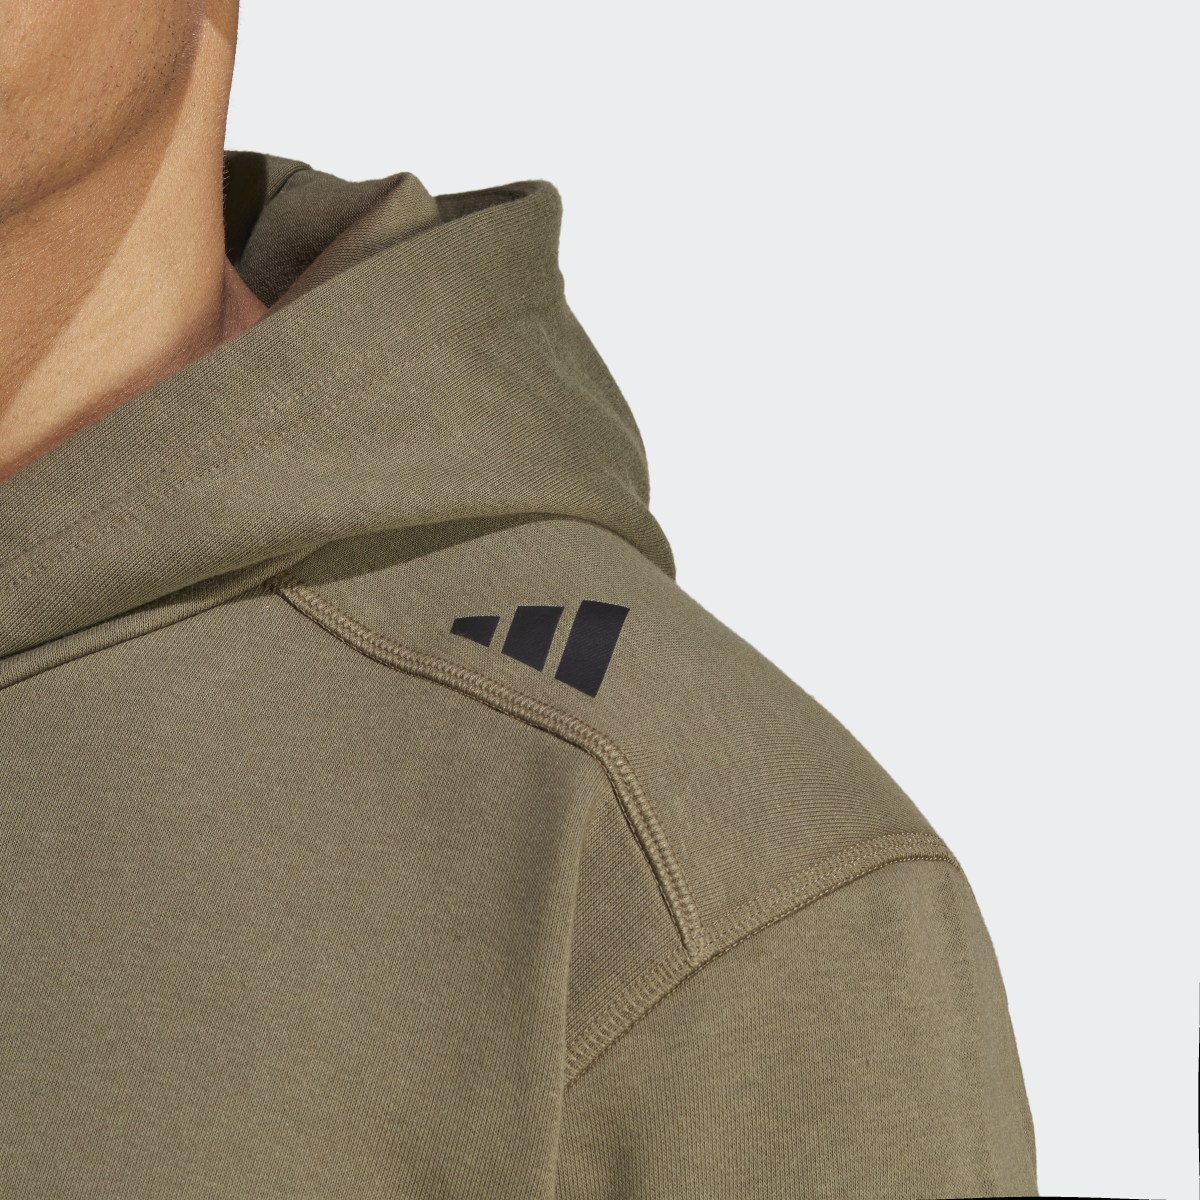 Adidas HIIT Hoodie Curated By Cody Rigsby. 7